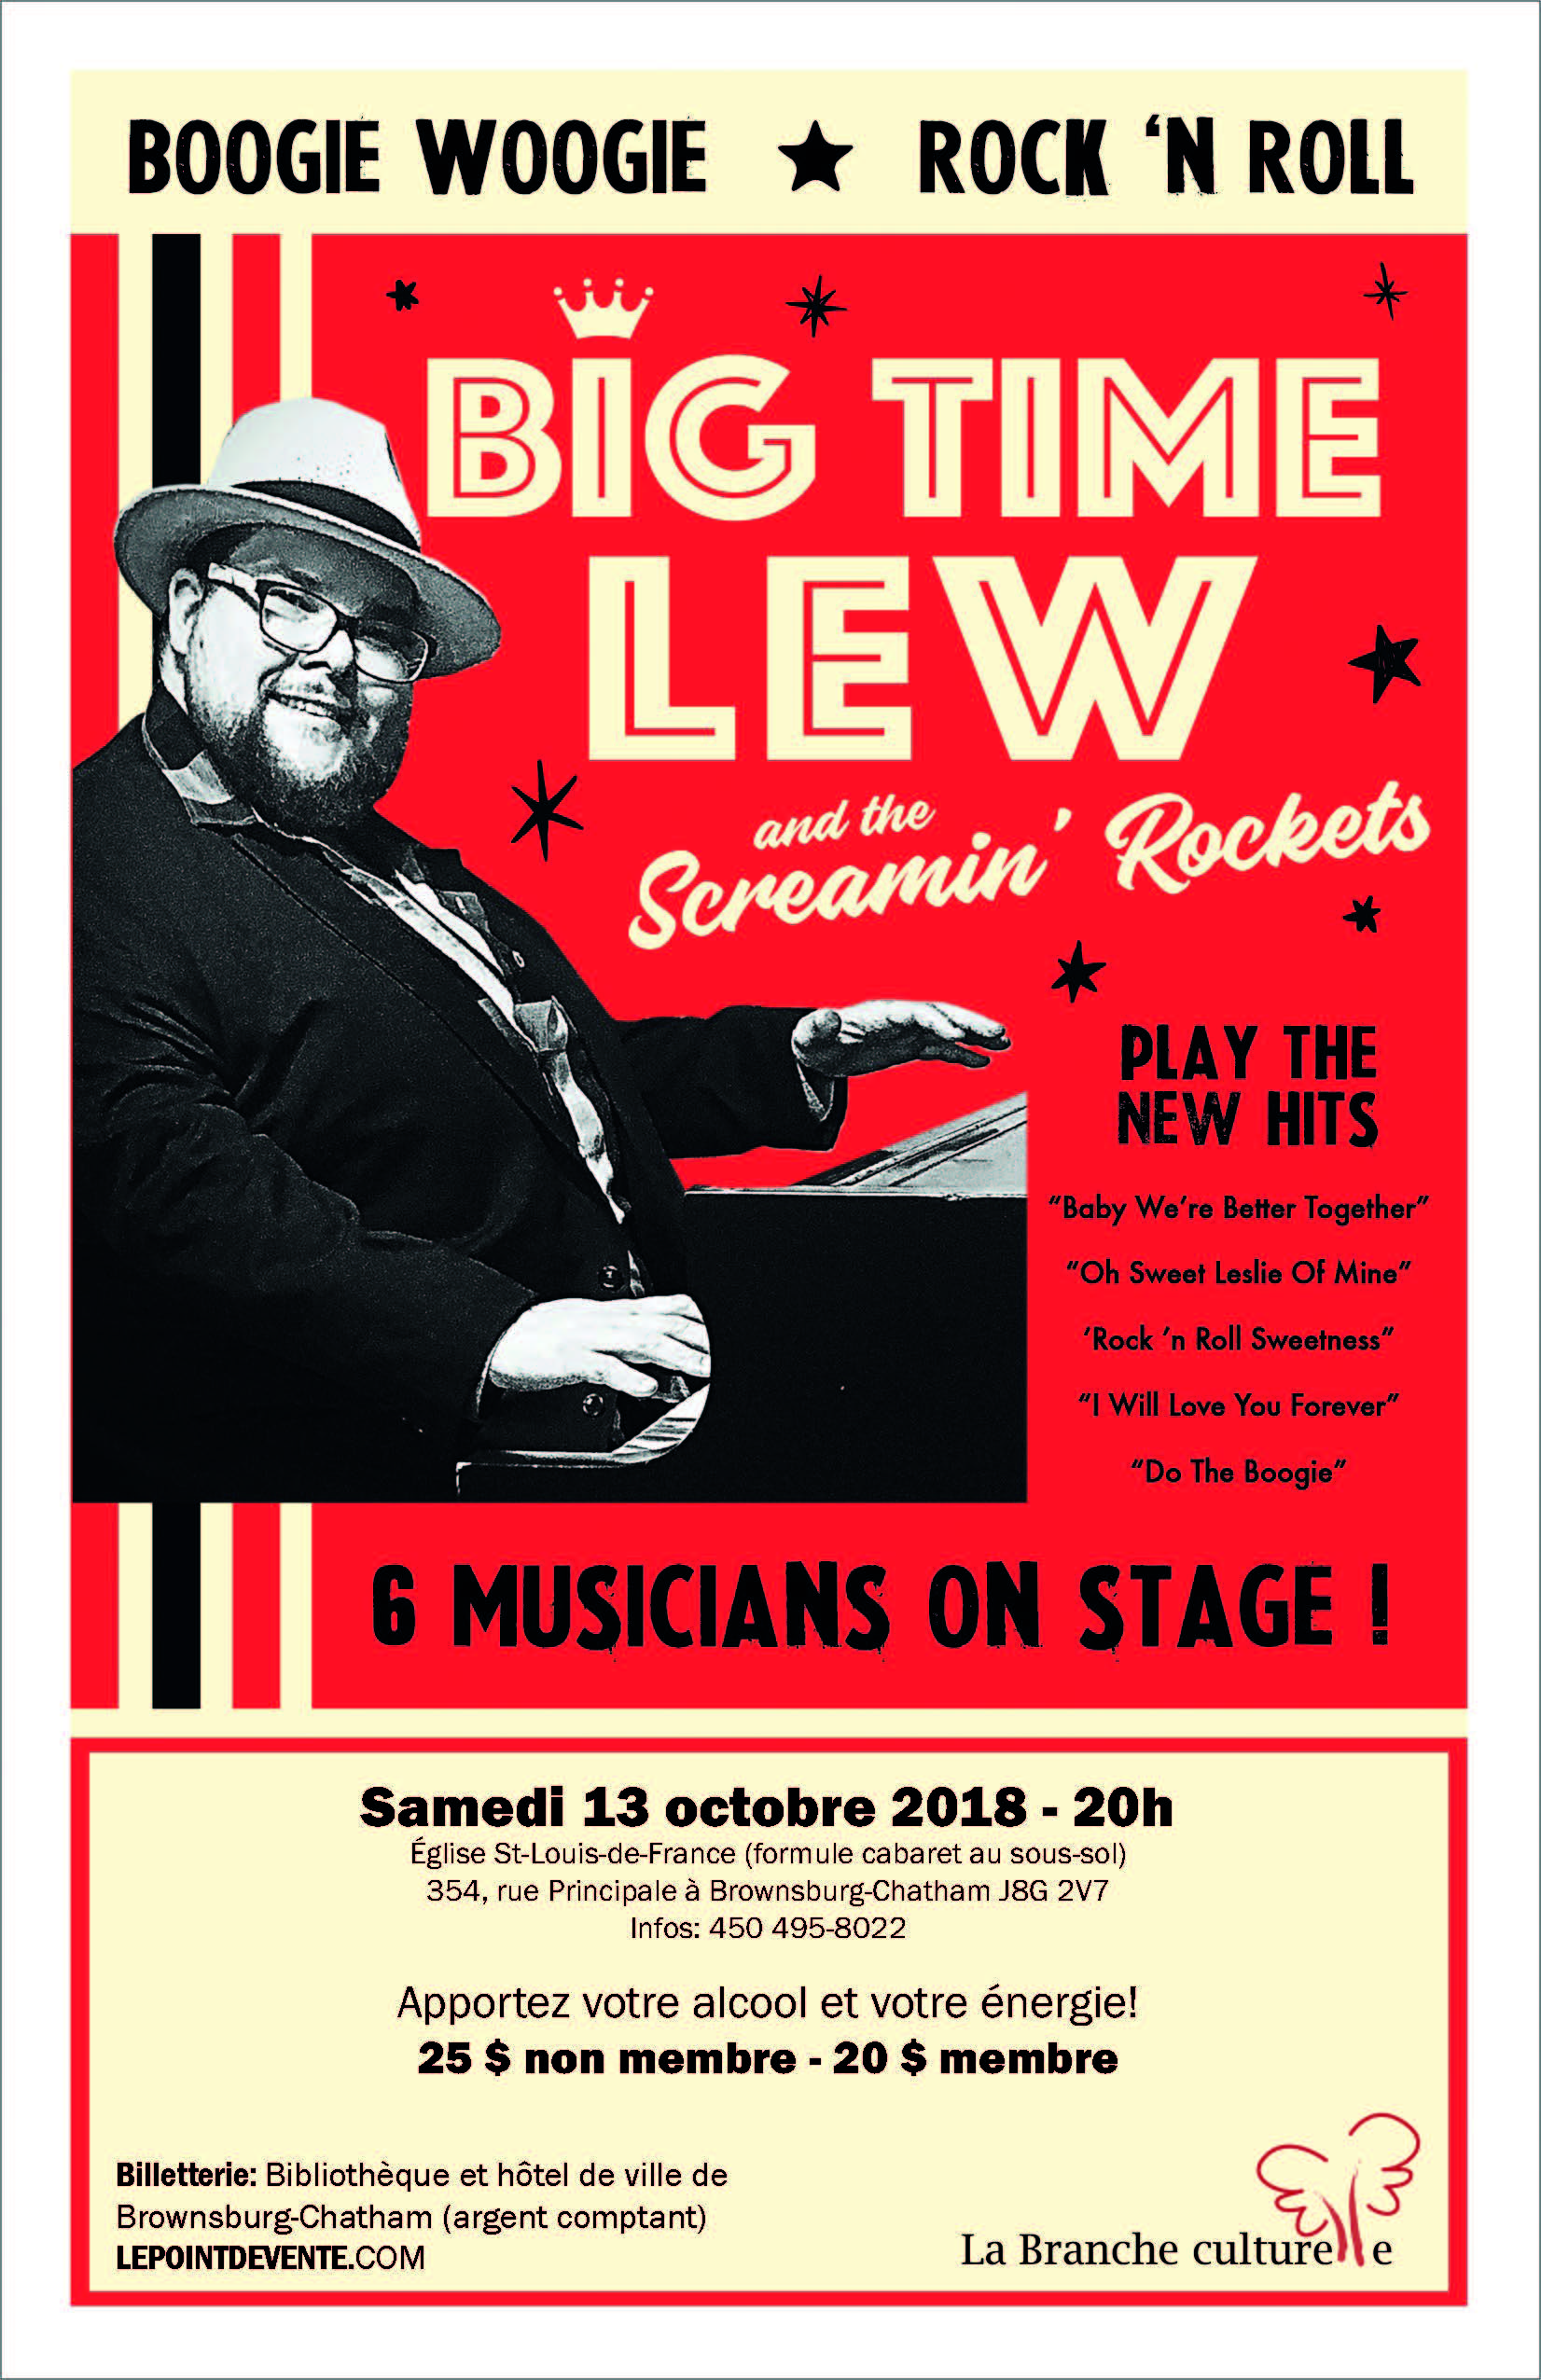 Big Time Lew and the Screamin’ Rockets in concert in Brownsburg-Chatham